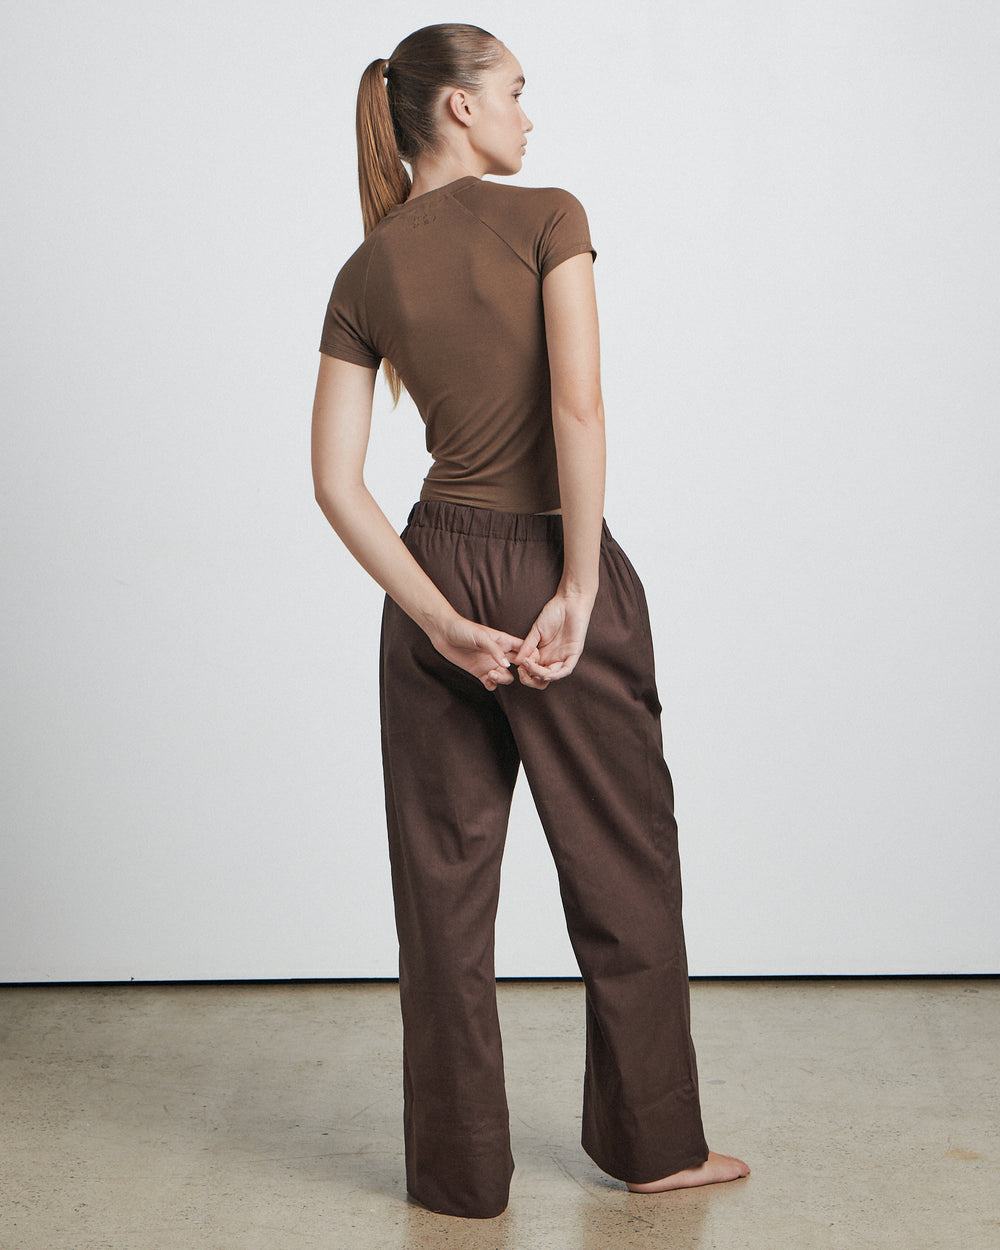 The Mid Rise Drawcord Pant